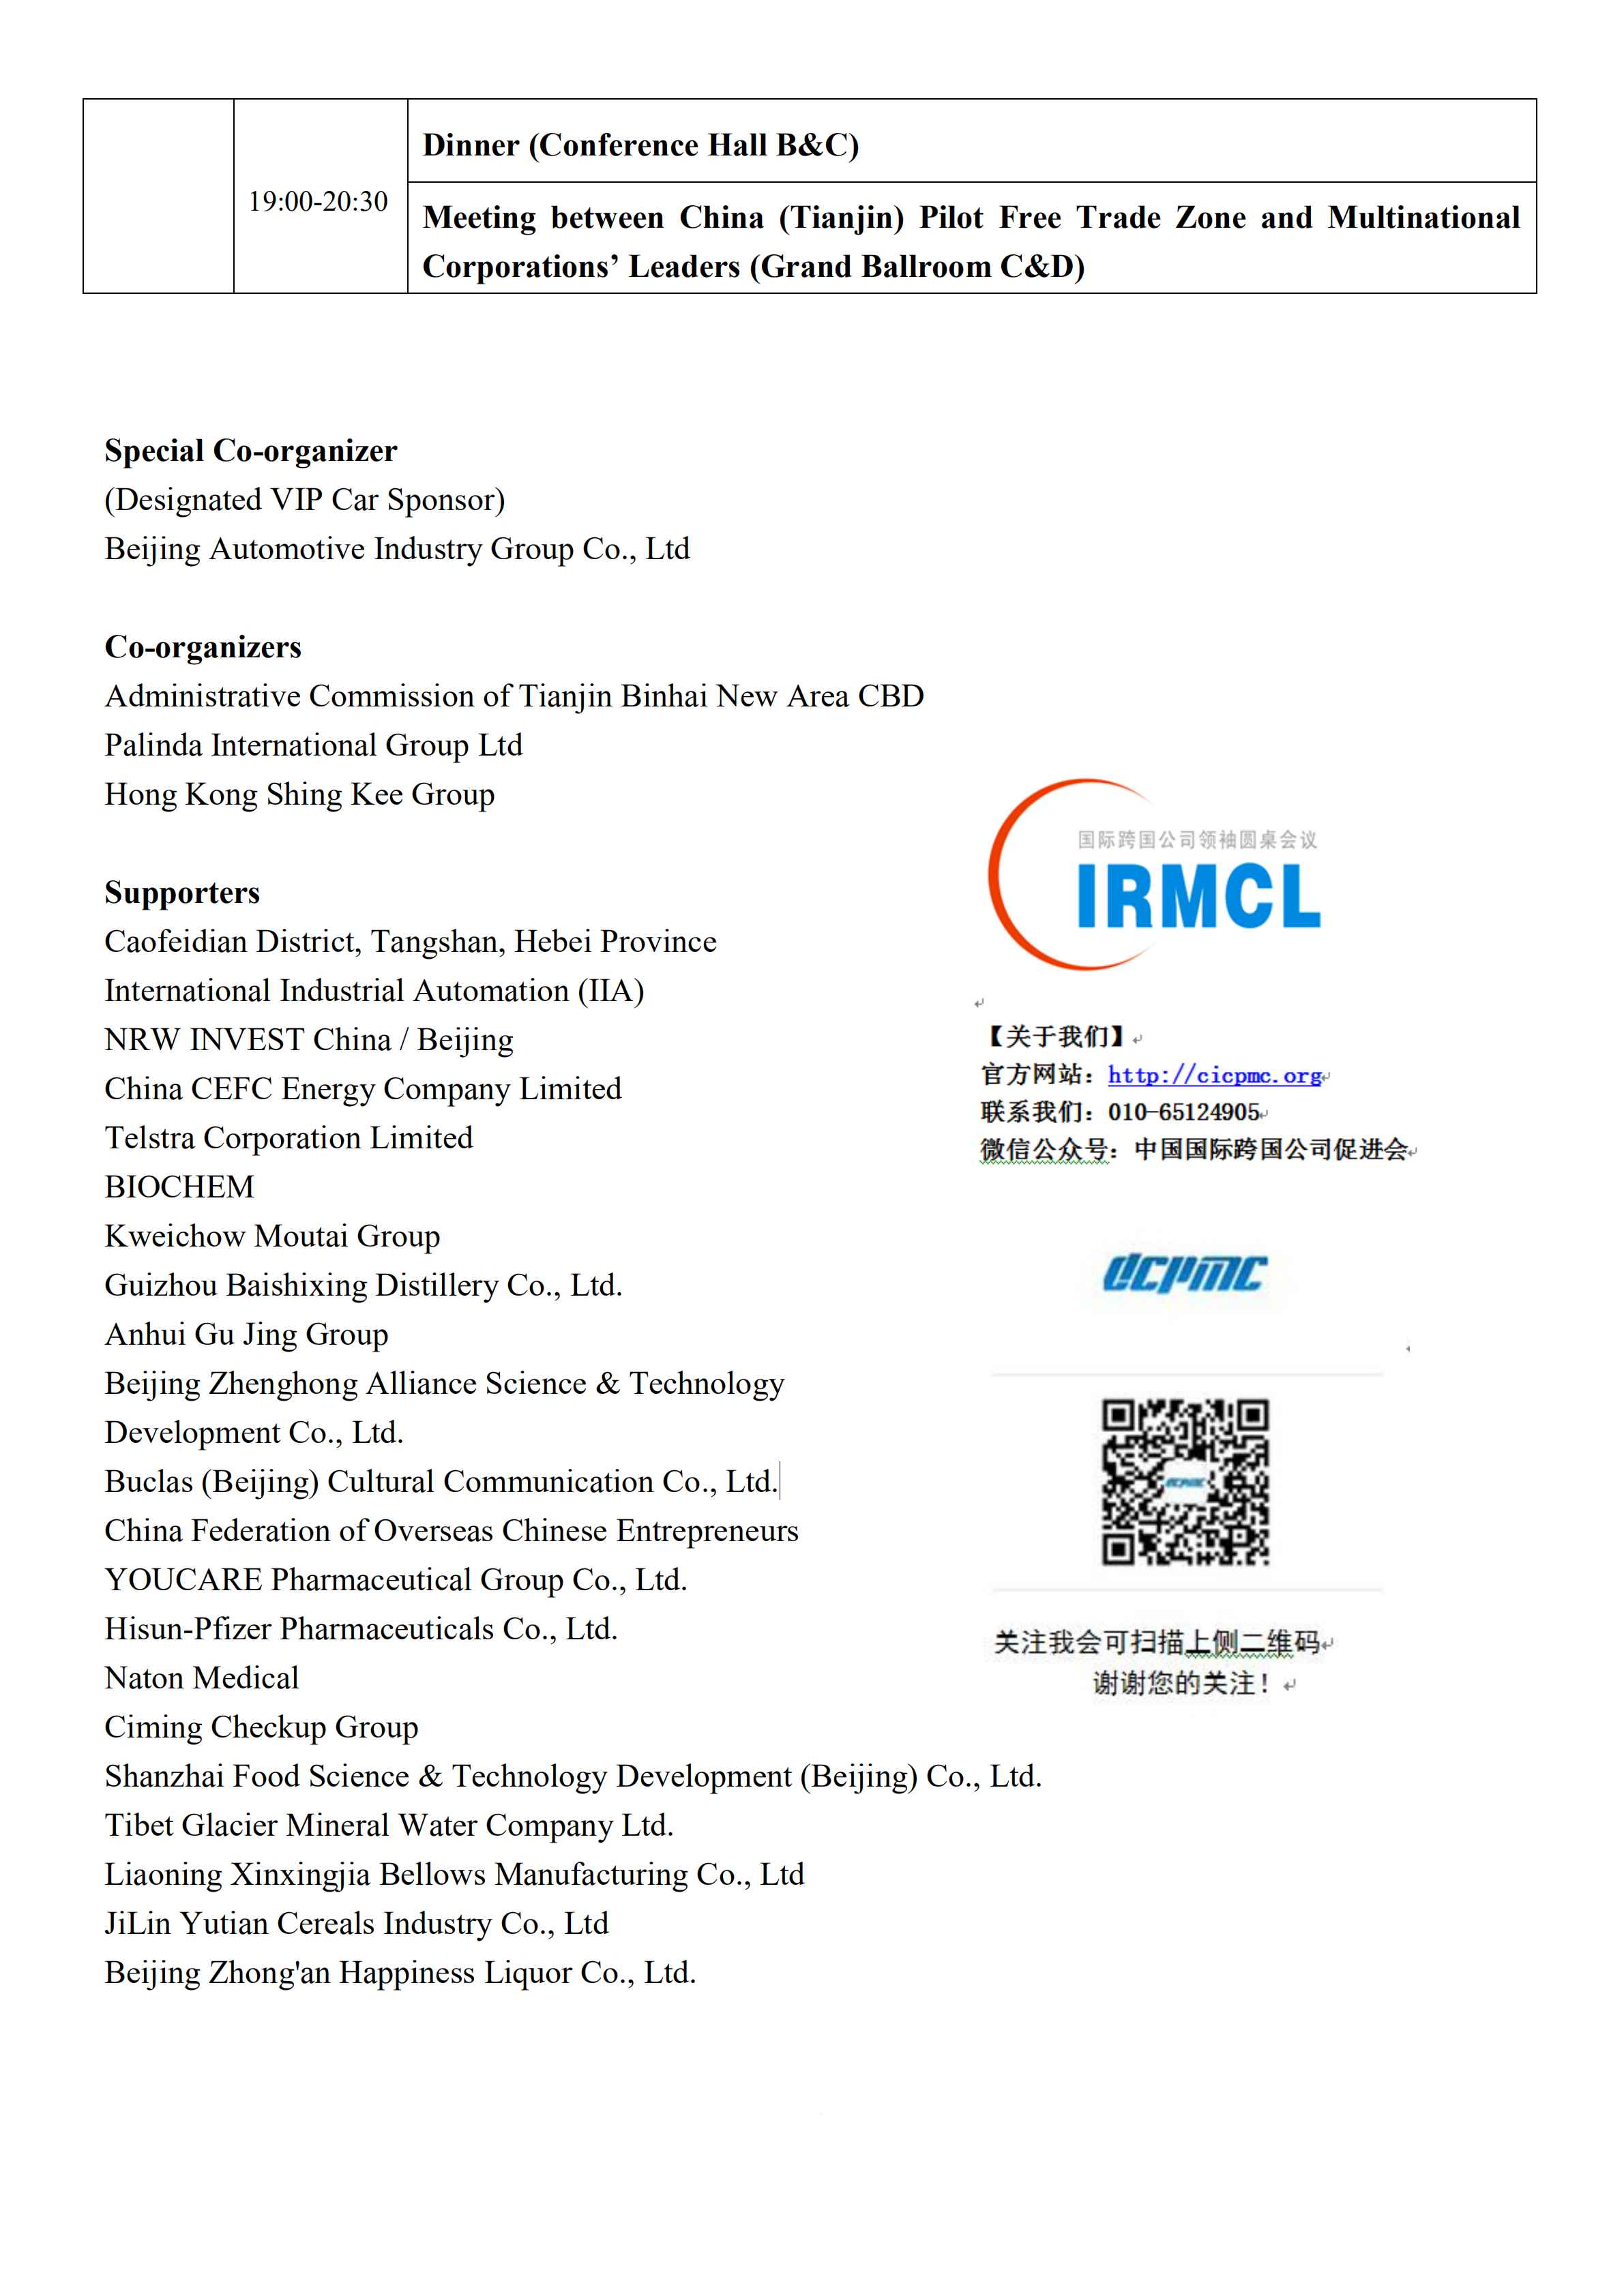 8th IRMCL